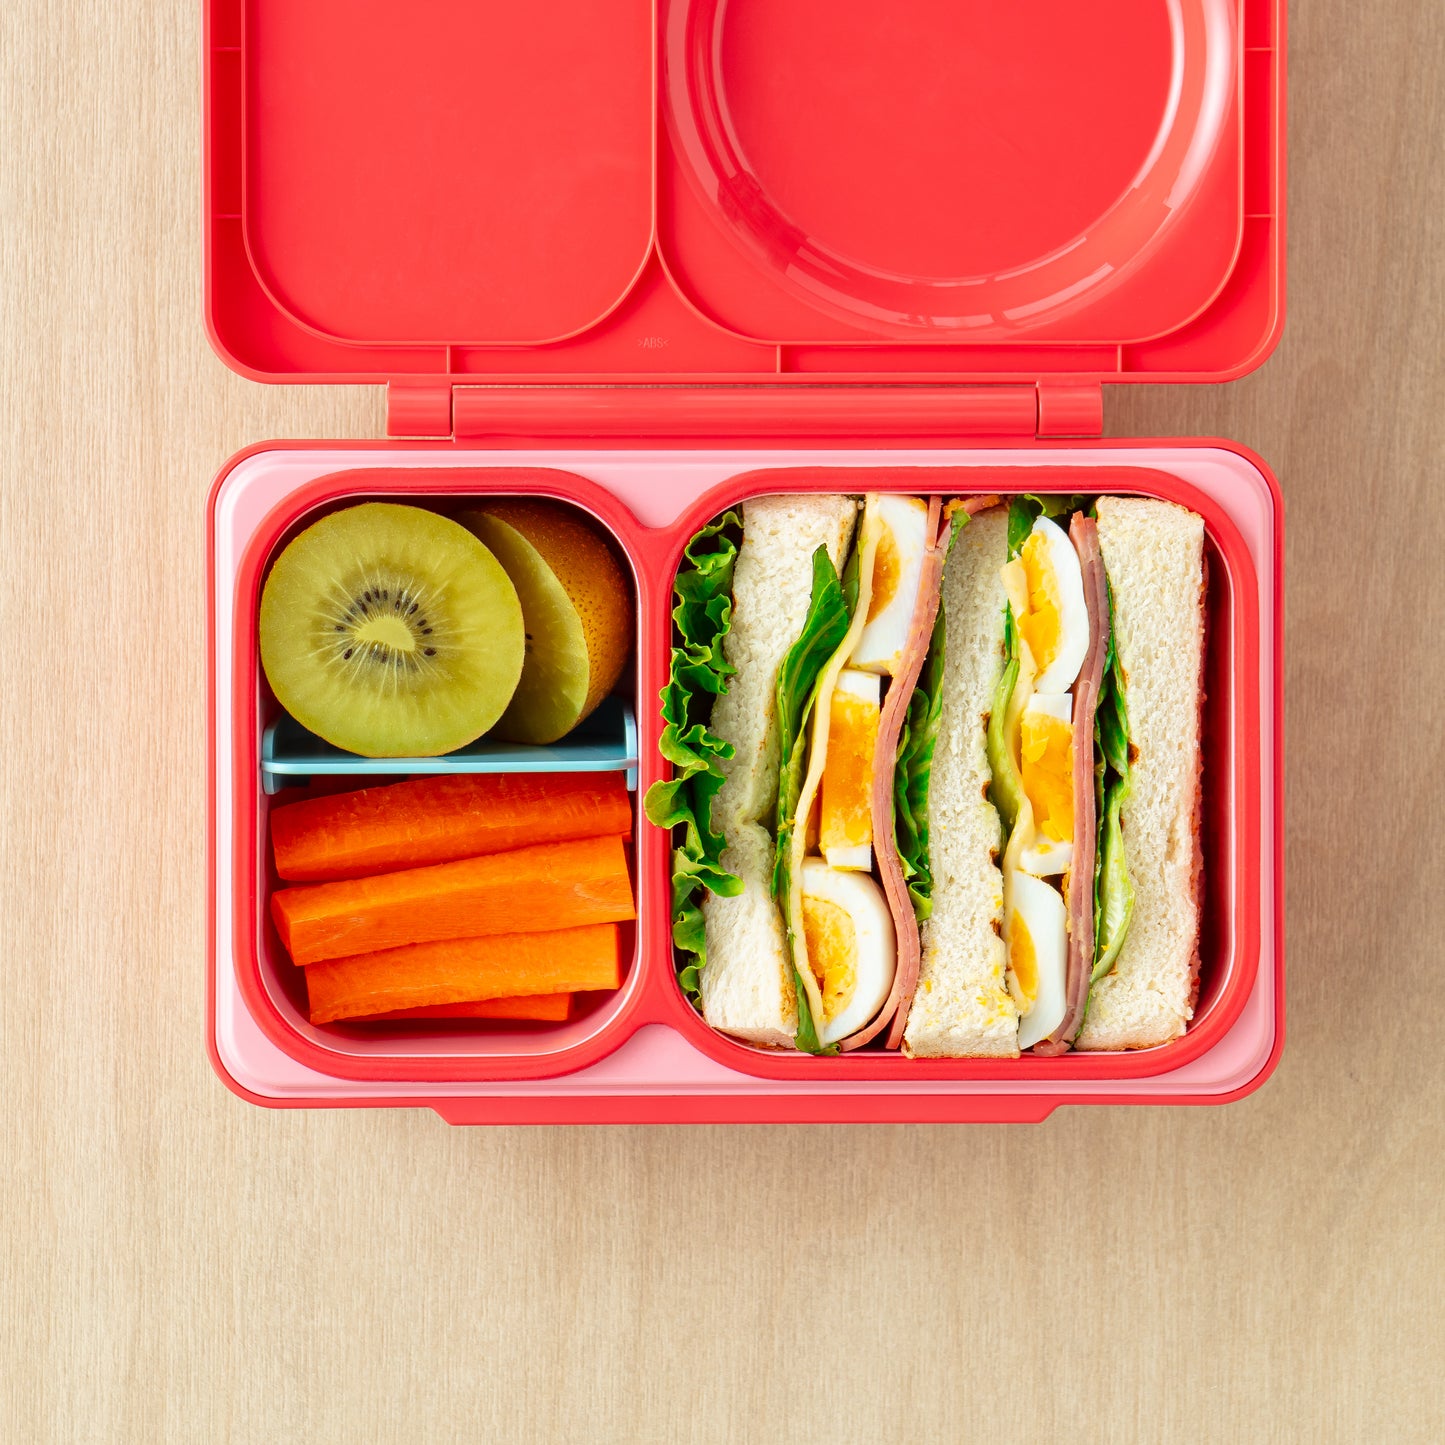 OmieBox UP Hot and Cold Bento Box - Cherry Pink